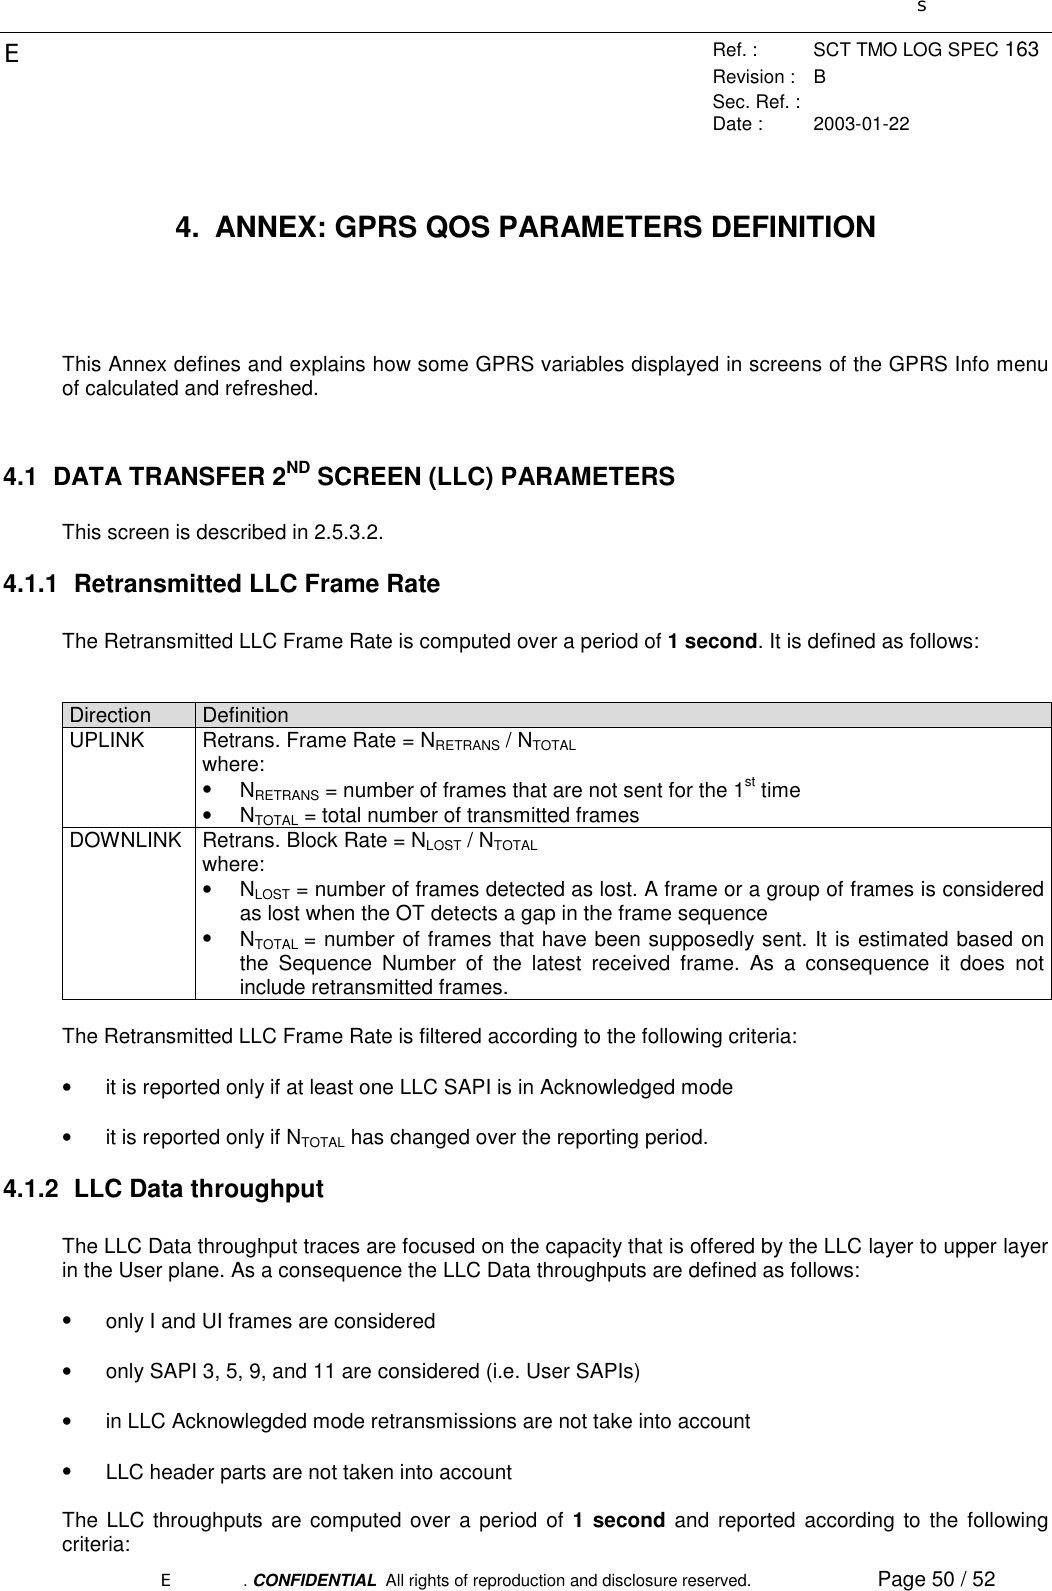 sERef. : SCT TMO LOG SPEC 163Revision : BSec. Ref. :Date : 2003-01-22E. CONFIDENTIAL  All rights of reproduction and disclosure reserved. Page 50 / 524.  ANNEX: GPRS QOS PARAMETERS DEFINITIONThis Annex defines and explains how some GPRS variables displayed in screens of the GPRS Info menuof calculated and refreshed.4.1 DATA TRANSFER 2ND SCREEN (LLC) PARAMETERSThis screen is described in 2.5.3.2.4.1.1  Retransmitted LLC Frame RateThe Retransmitted LLC Frame Rate is computed over a period of 1 second. It is defined as follows:Direction DefinitionUPLINK Retrans. Frame Rate = NRETRANS / NTOTALwhere:• NRETRANS = number of frames that are not sent for the 1st time• NTOTAL = total number of transmitted framesDOWNLINK Retrans. Block Rate = NLOST / NTOTALwhere:• NLOST = number of frames detected as lost. A frame or a group of frames is consideredas lost when the OT detects a gap in the frame sequence• NTOTAL = number of frames that have been supposedly sent. It is estimated based onthe Sequence Number of the latest received frame. As a consequence it does notinclude retransmitted frames.The Retransmitted LLC Frame Rate is filtered according to the following criteria:•  it is reported only if at least one LLC SAPI is in Acknowledged mode•  it is reported only if NTOTAL has changed over the reporting period.4.1.2  LLC Data throughputThe LLC Data throughput traces are focused on the capacity that is offered by the LLC layer to upper layerin the User plane. As a consequence the LLC Data throughputs are defined as follows:•  only I and UI frames are considered•  only SAPI 3, 5, 9, and 11 are considered (i.e. User SAPIs)•  in LLC Acknowlegded mode retransmissions are not take into account•  LLC header parts are not taken into accountThe LLC throughputs are computed over a period of 1 second and reported according to the followingcriteria: